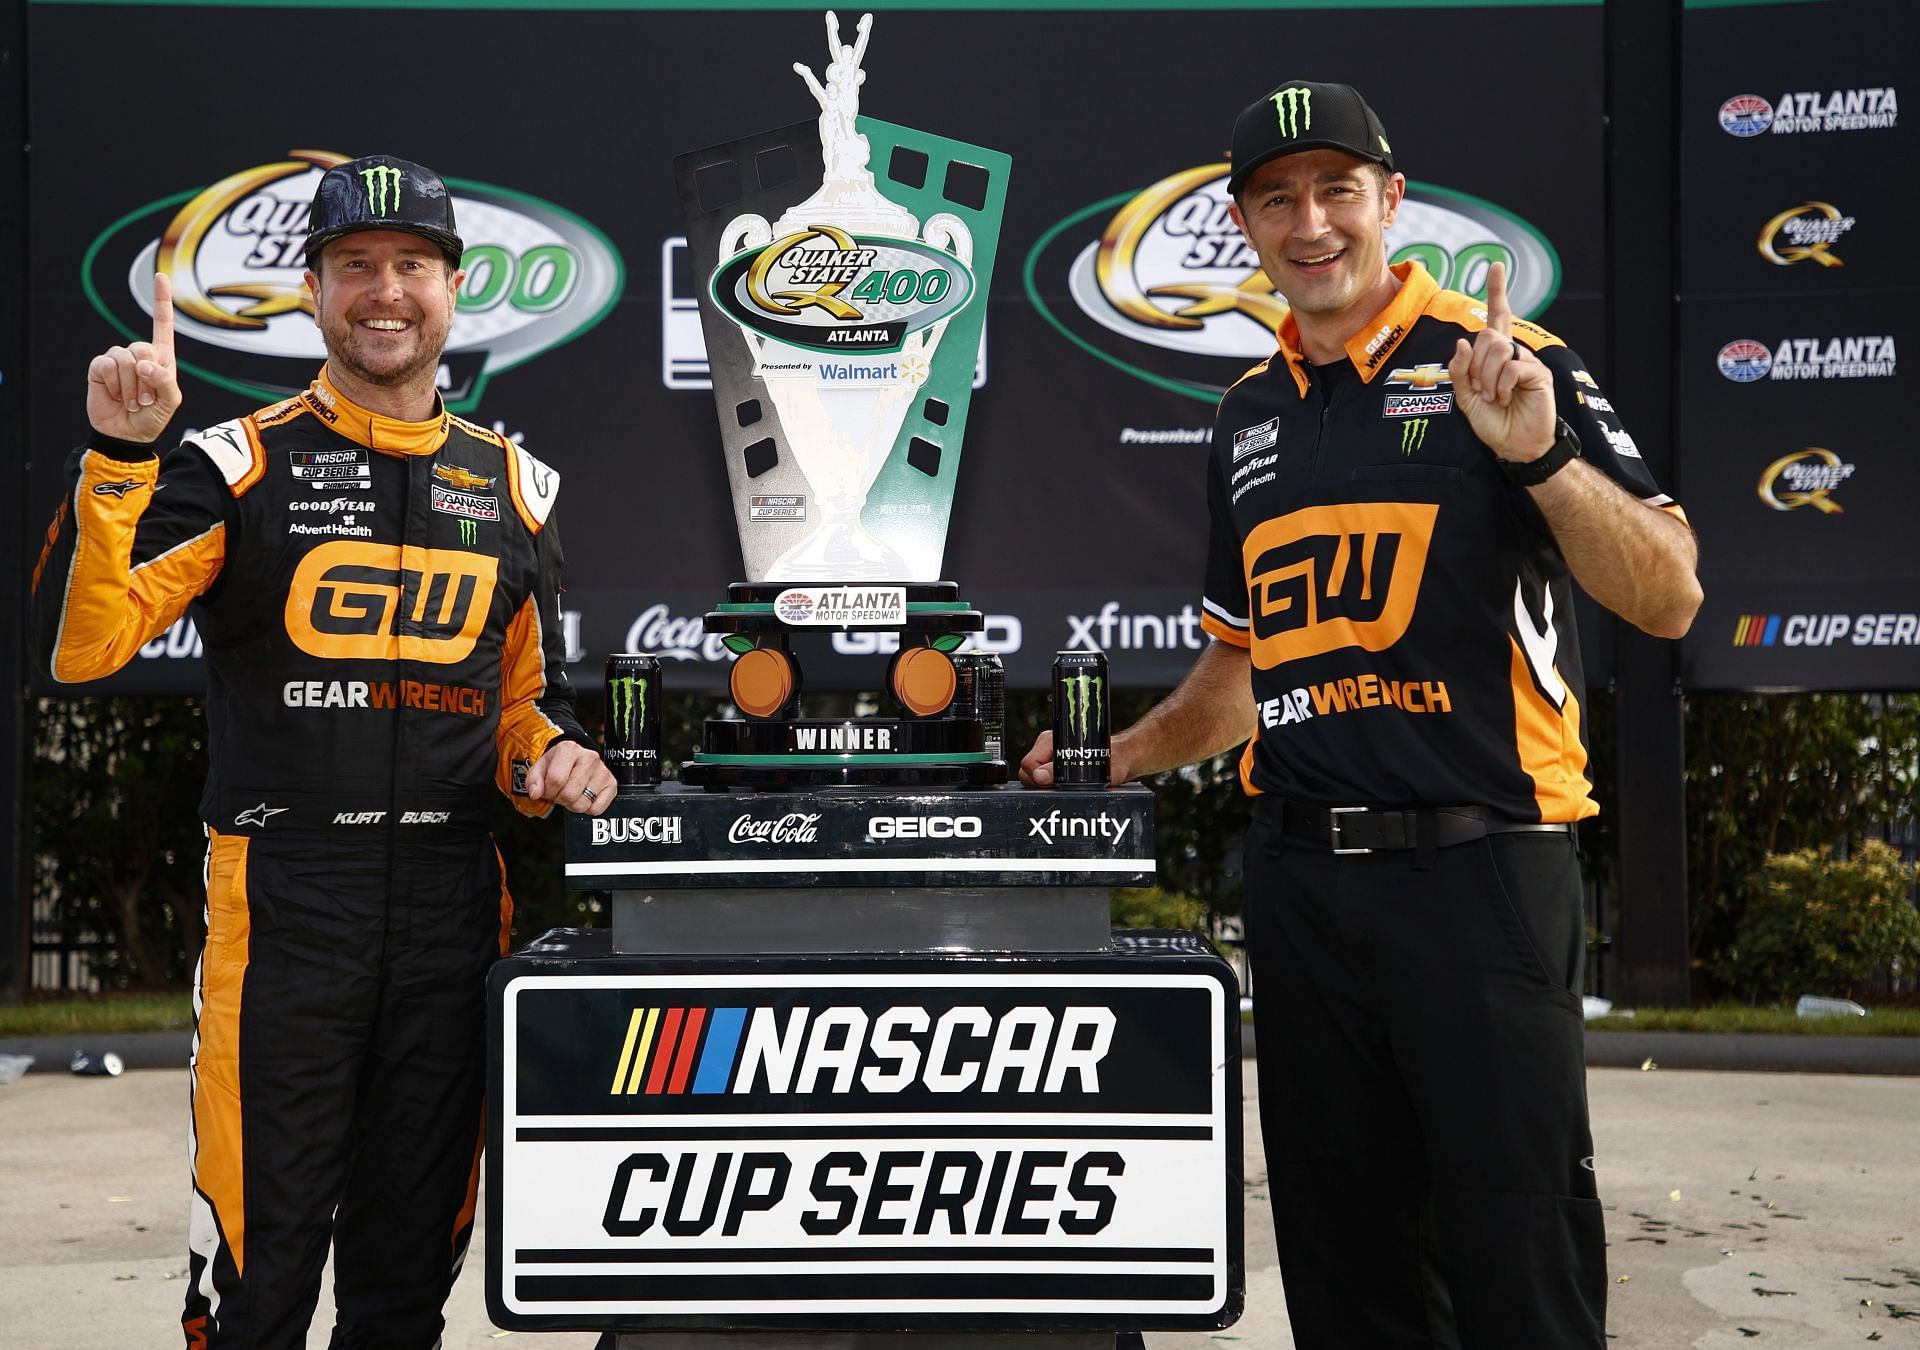 Kurt Busch and crew chief Matt McCall (right) celebrate in victory lane after winning the NASCAR Cup Series Quaker State 400 at Atlanta in July. (Photo by Jared C. Tilton/Getty Images)